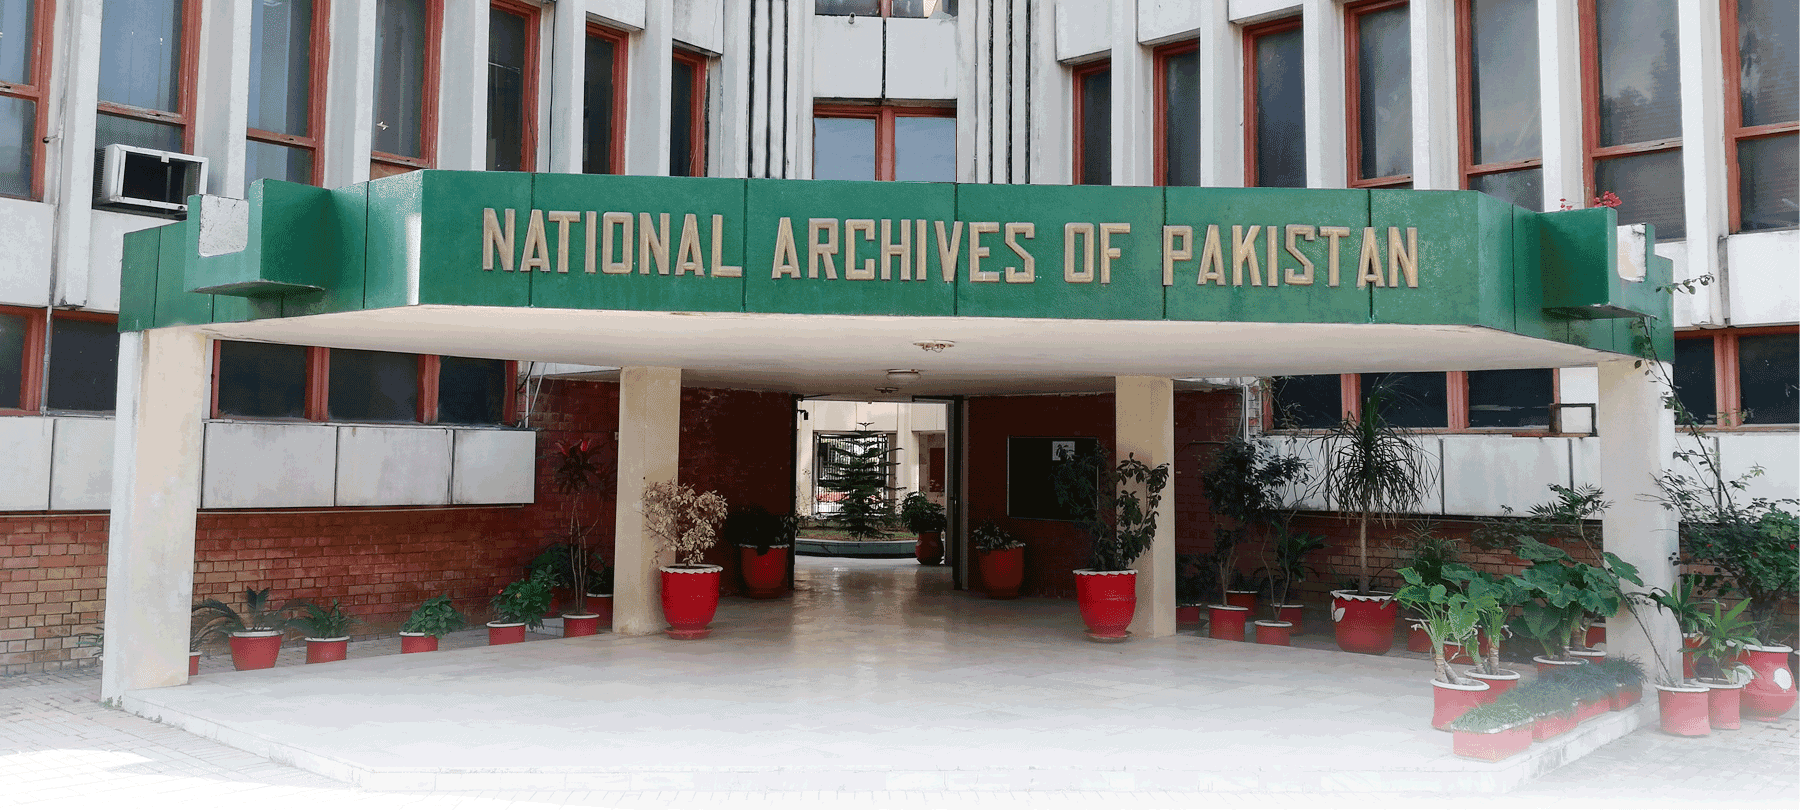 National archives of Pakistan